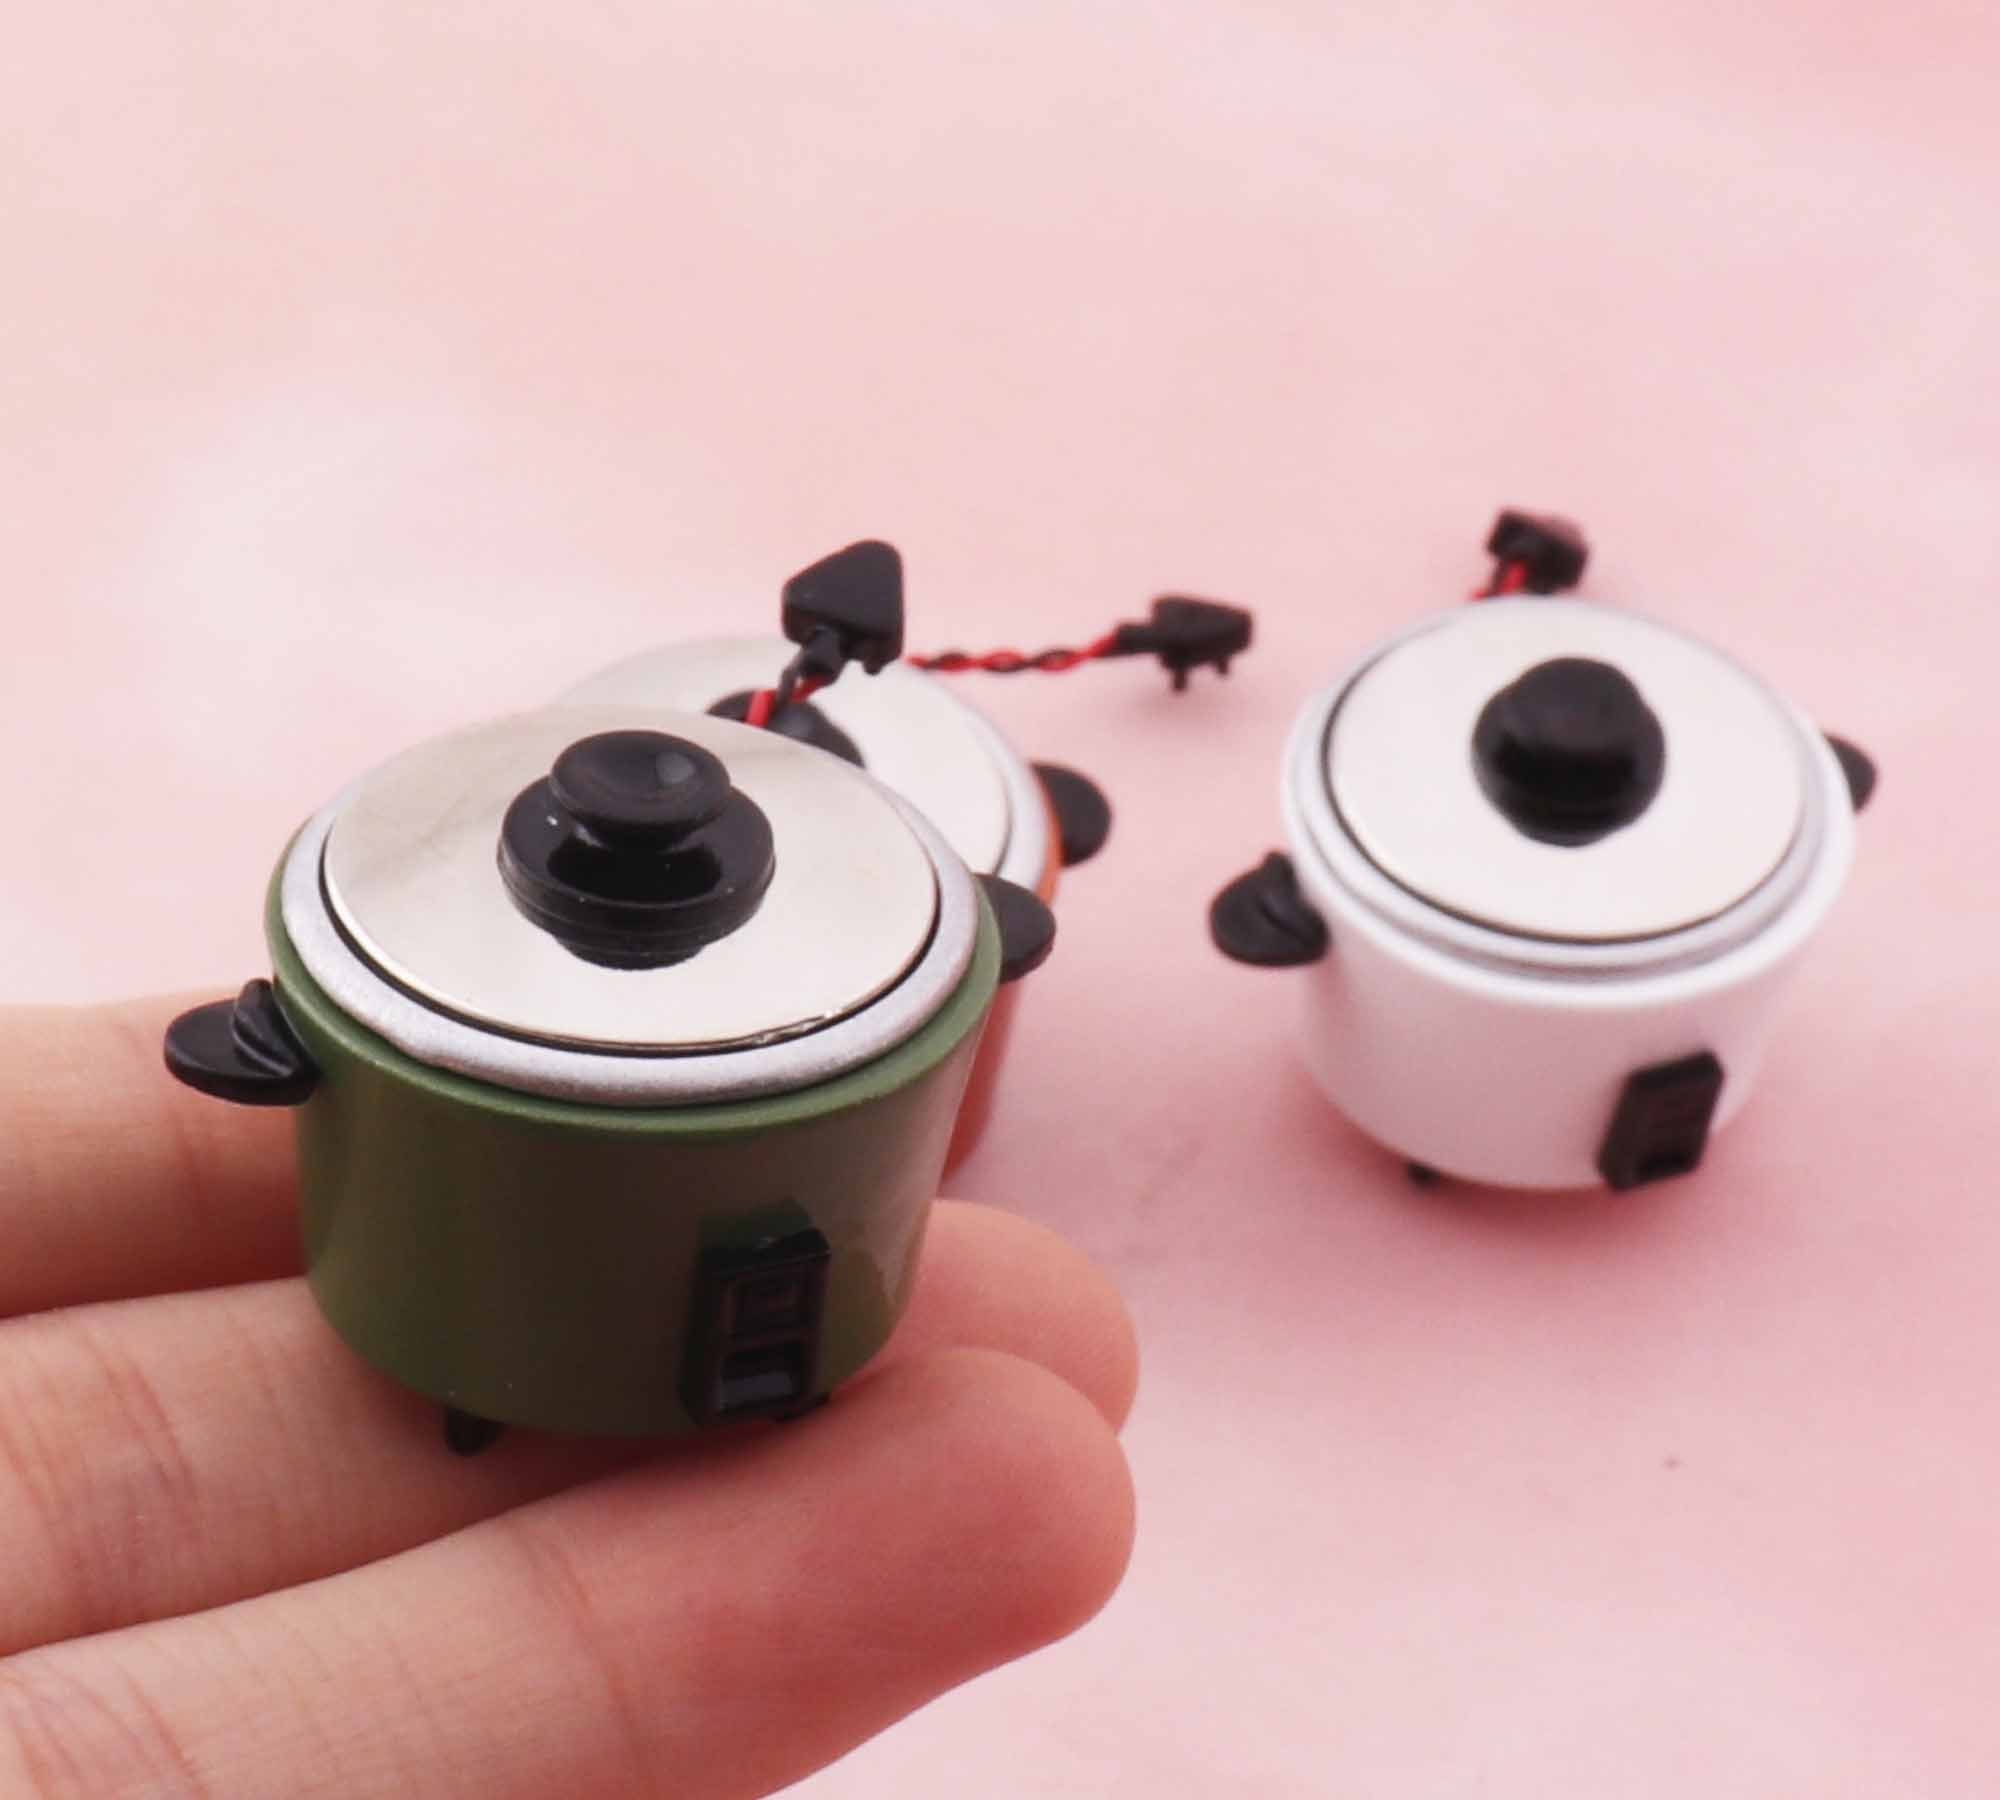 Kenelephant Miniature capsule toy Datong electric rice cooker Simulation of  electrical appliances mystery box